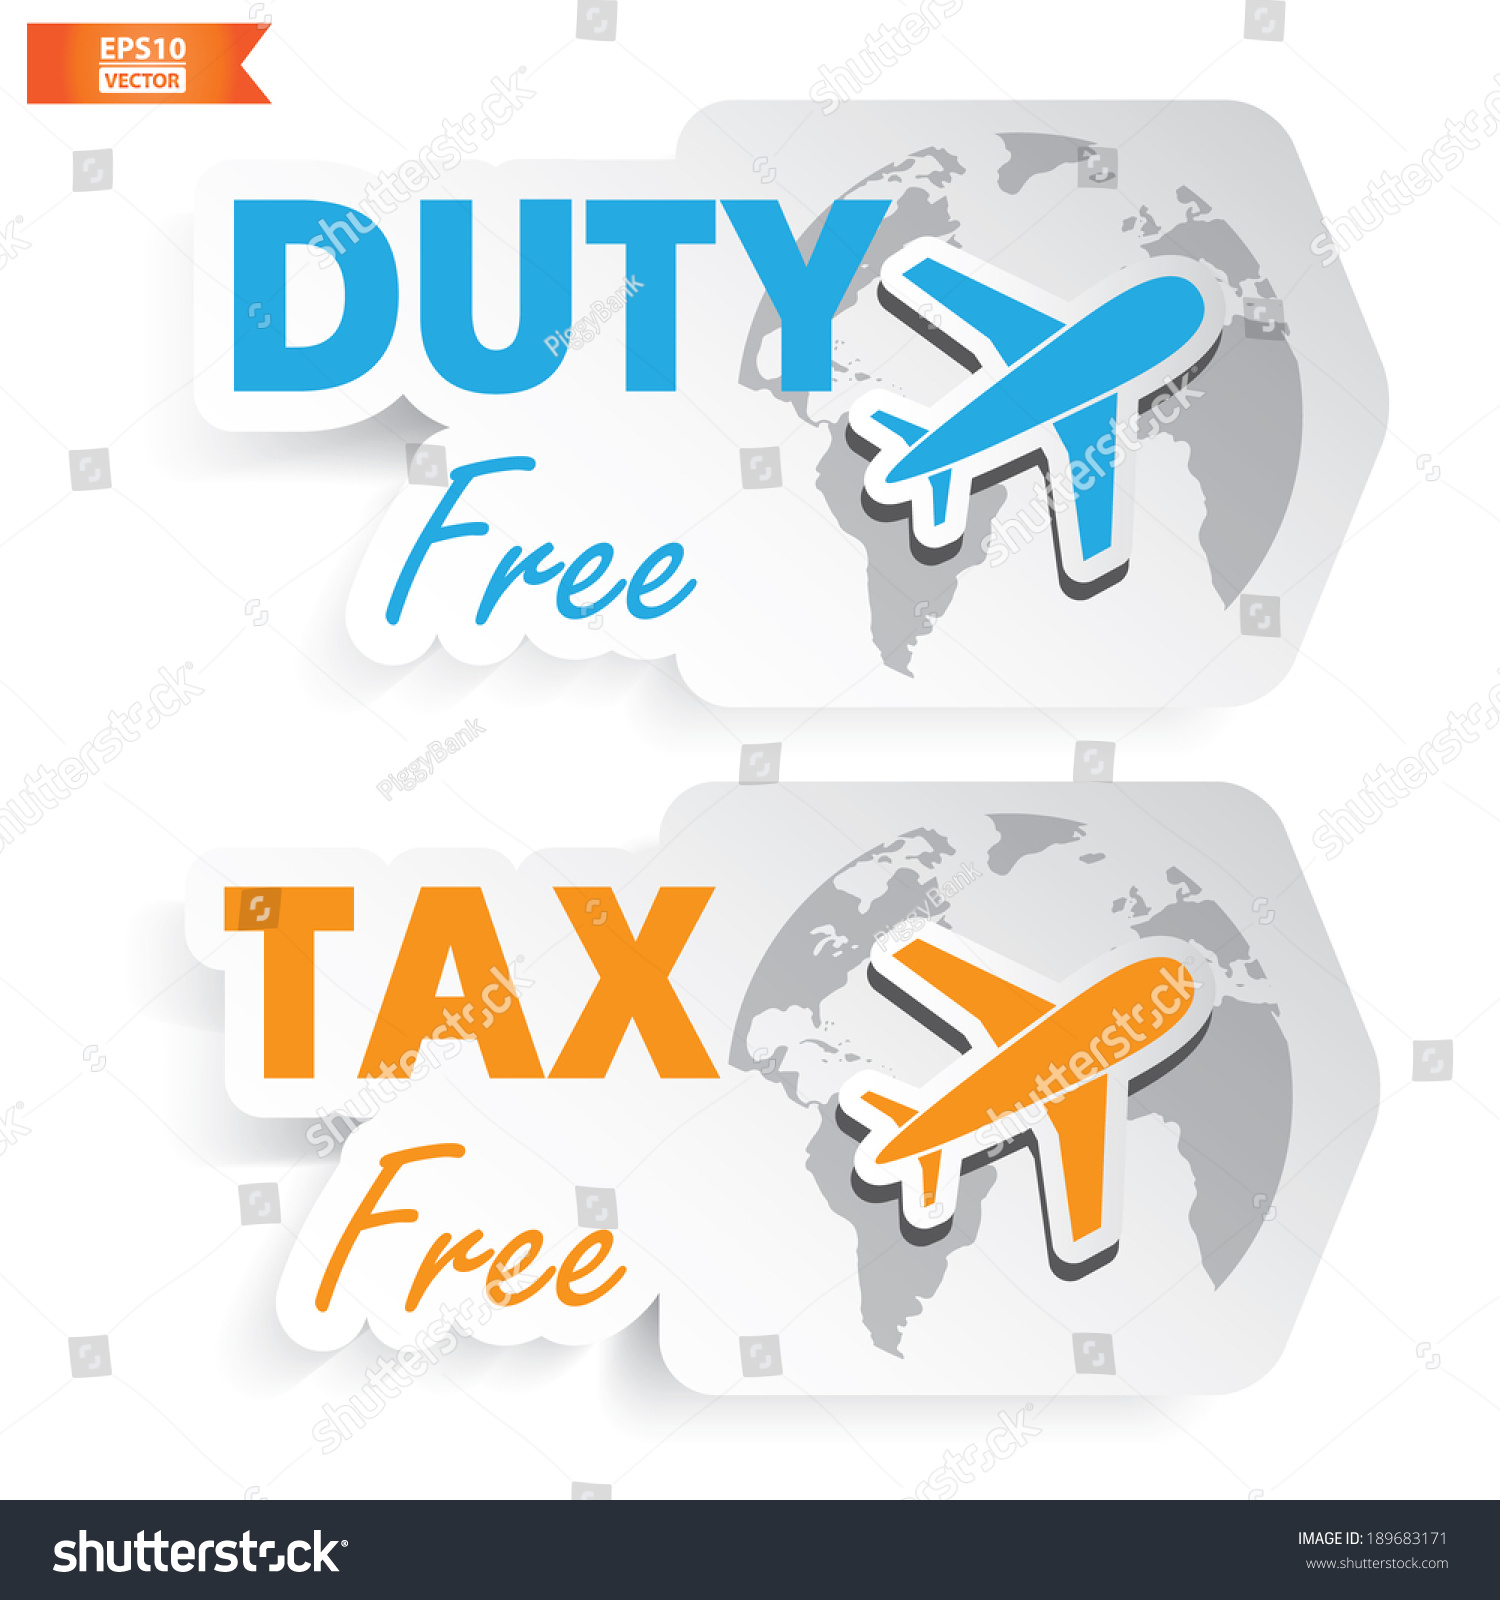 Why Is Duty Free Tax Free